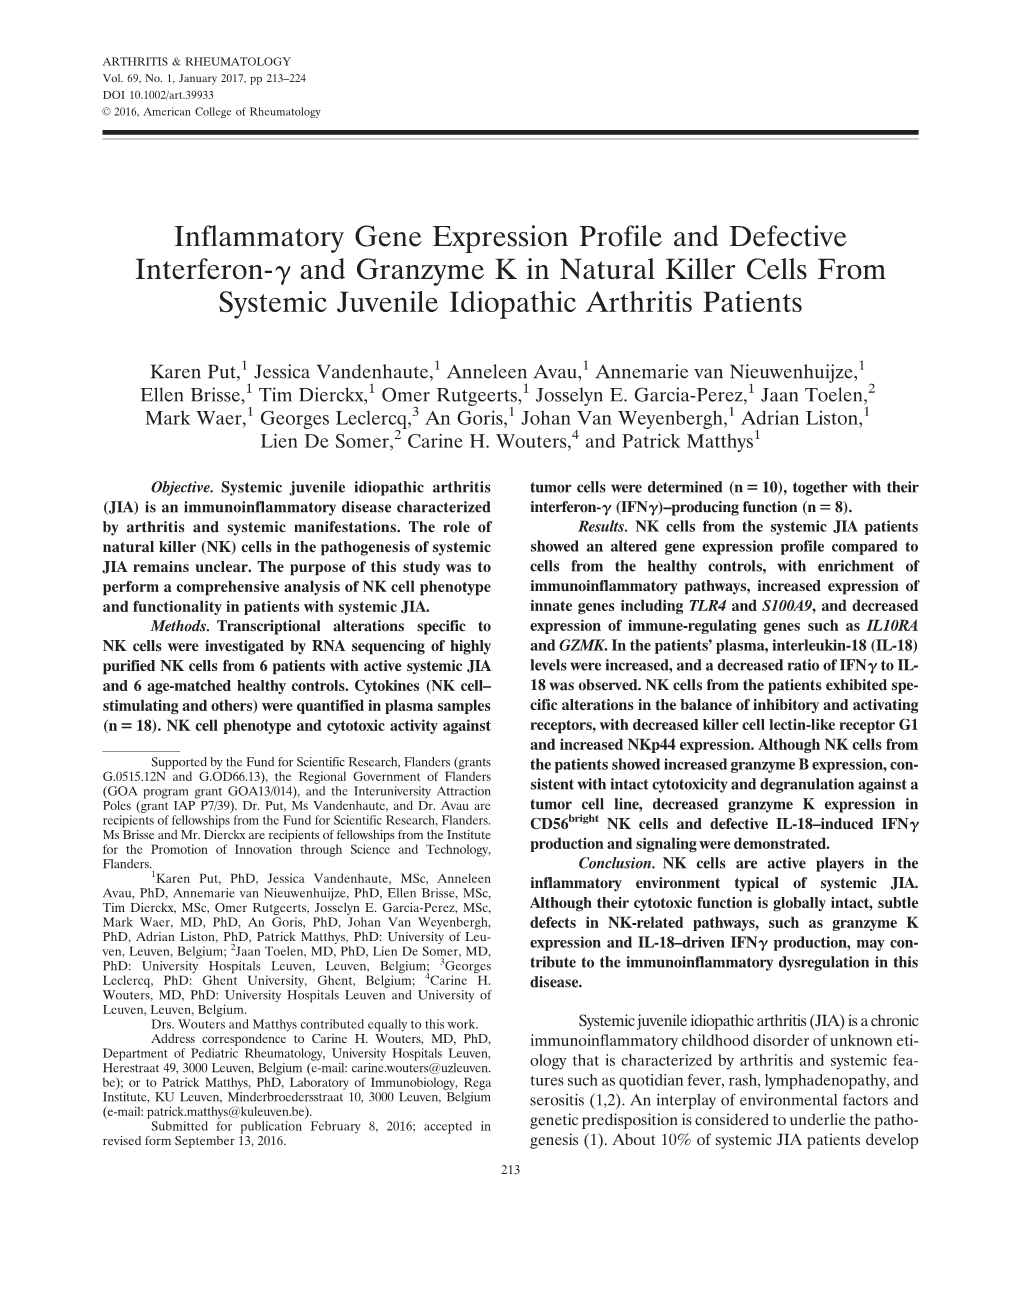 Inflammatory Gene Expression Profile and Defective Interferon-G and Granzyme K in Natural Killer Cells from Systemic Juvenile Idiopathic Arthritis Patients